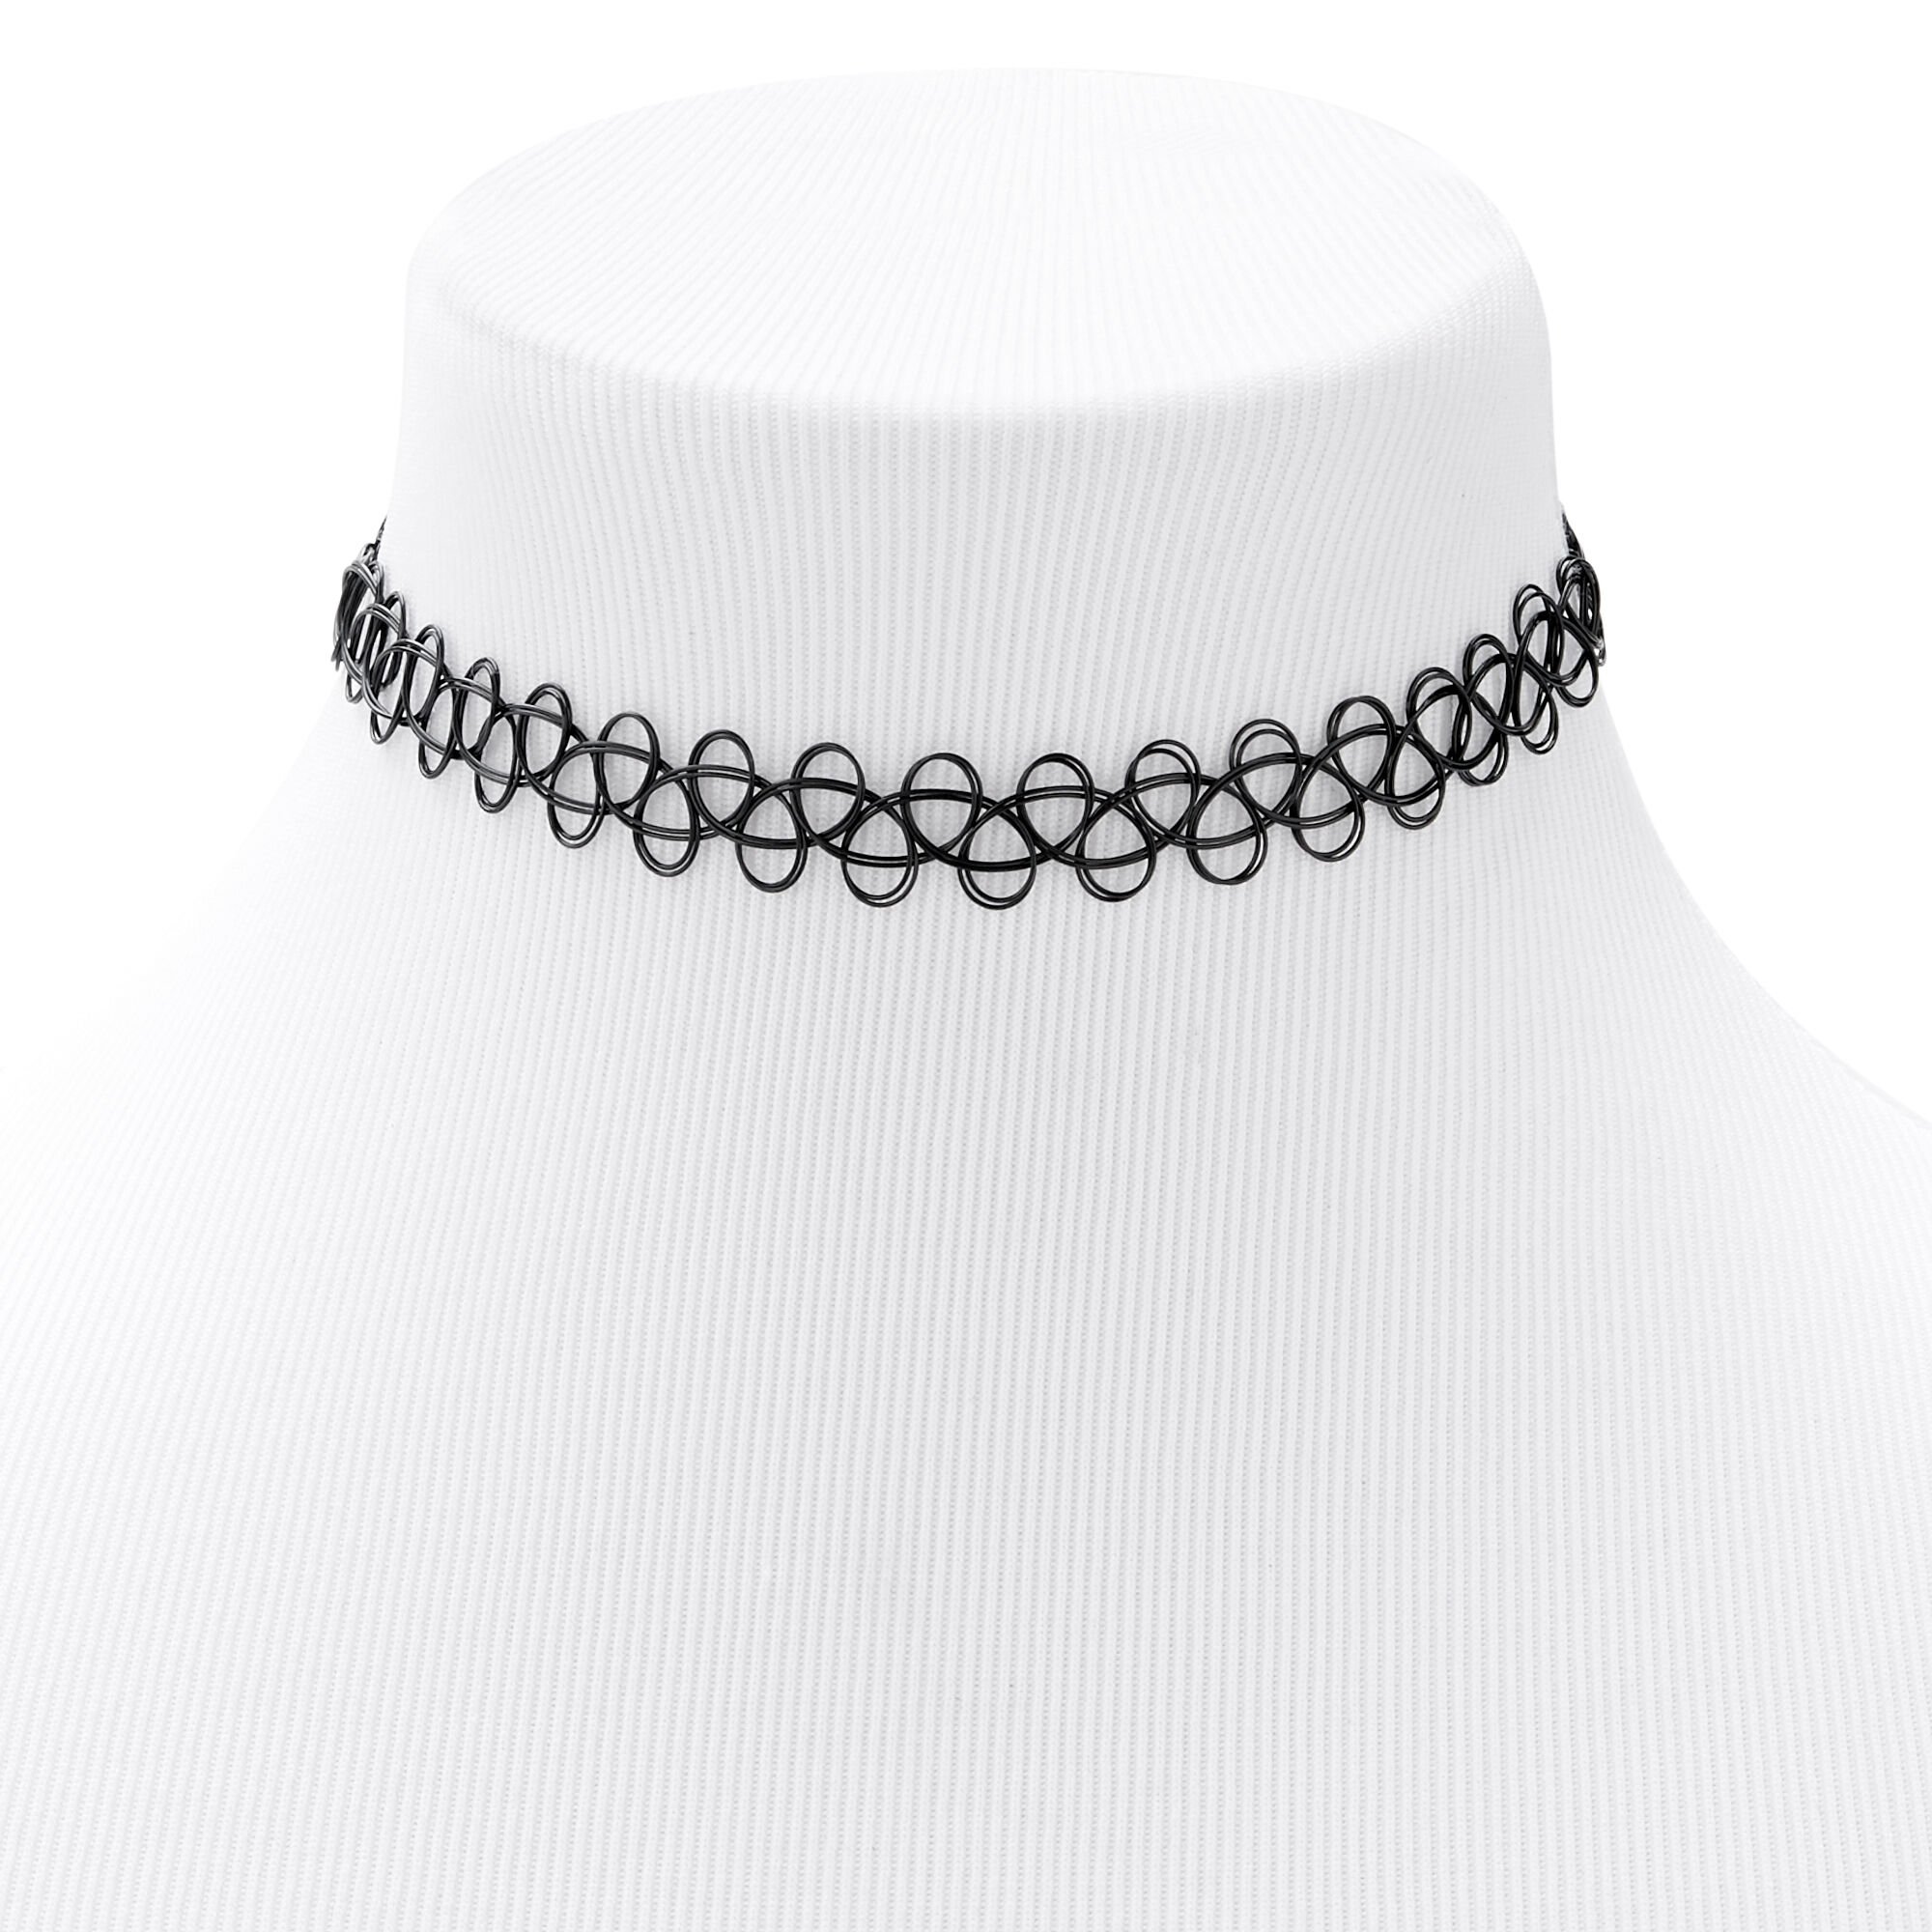 View Claires Tattoo Choker Necklace Black information